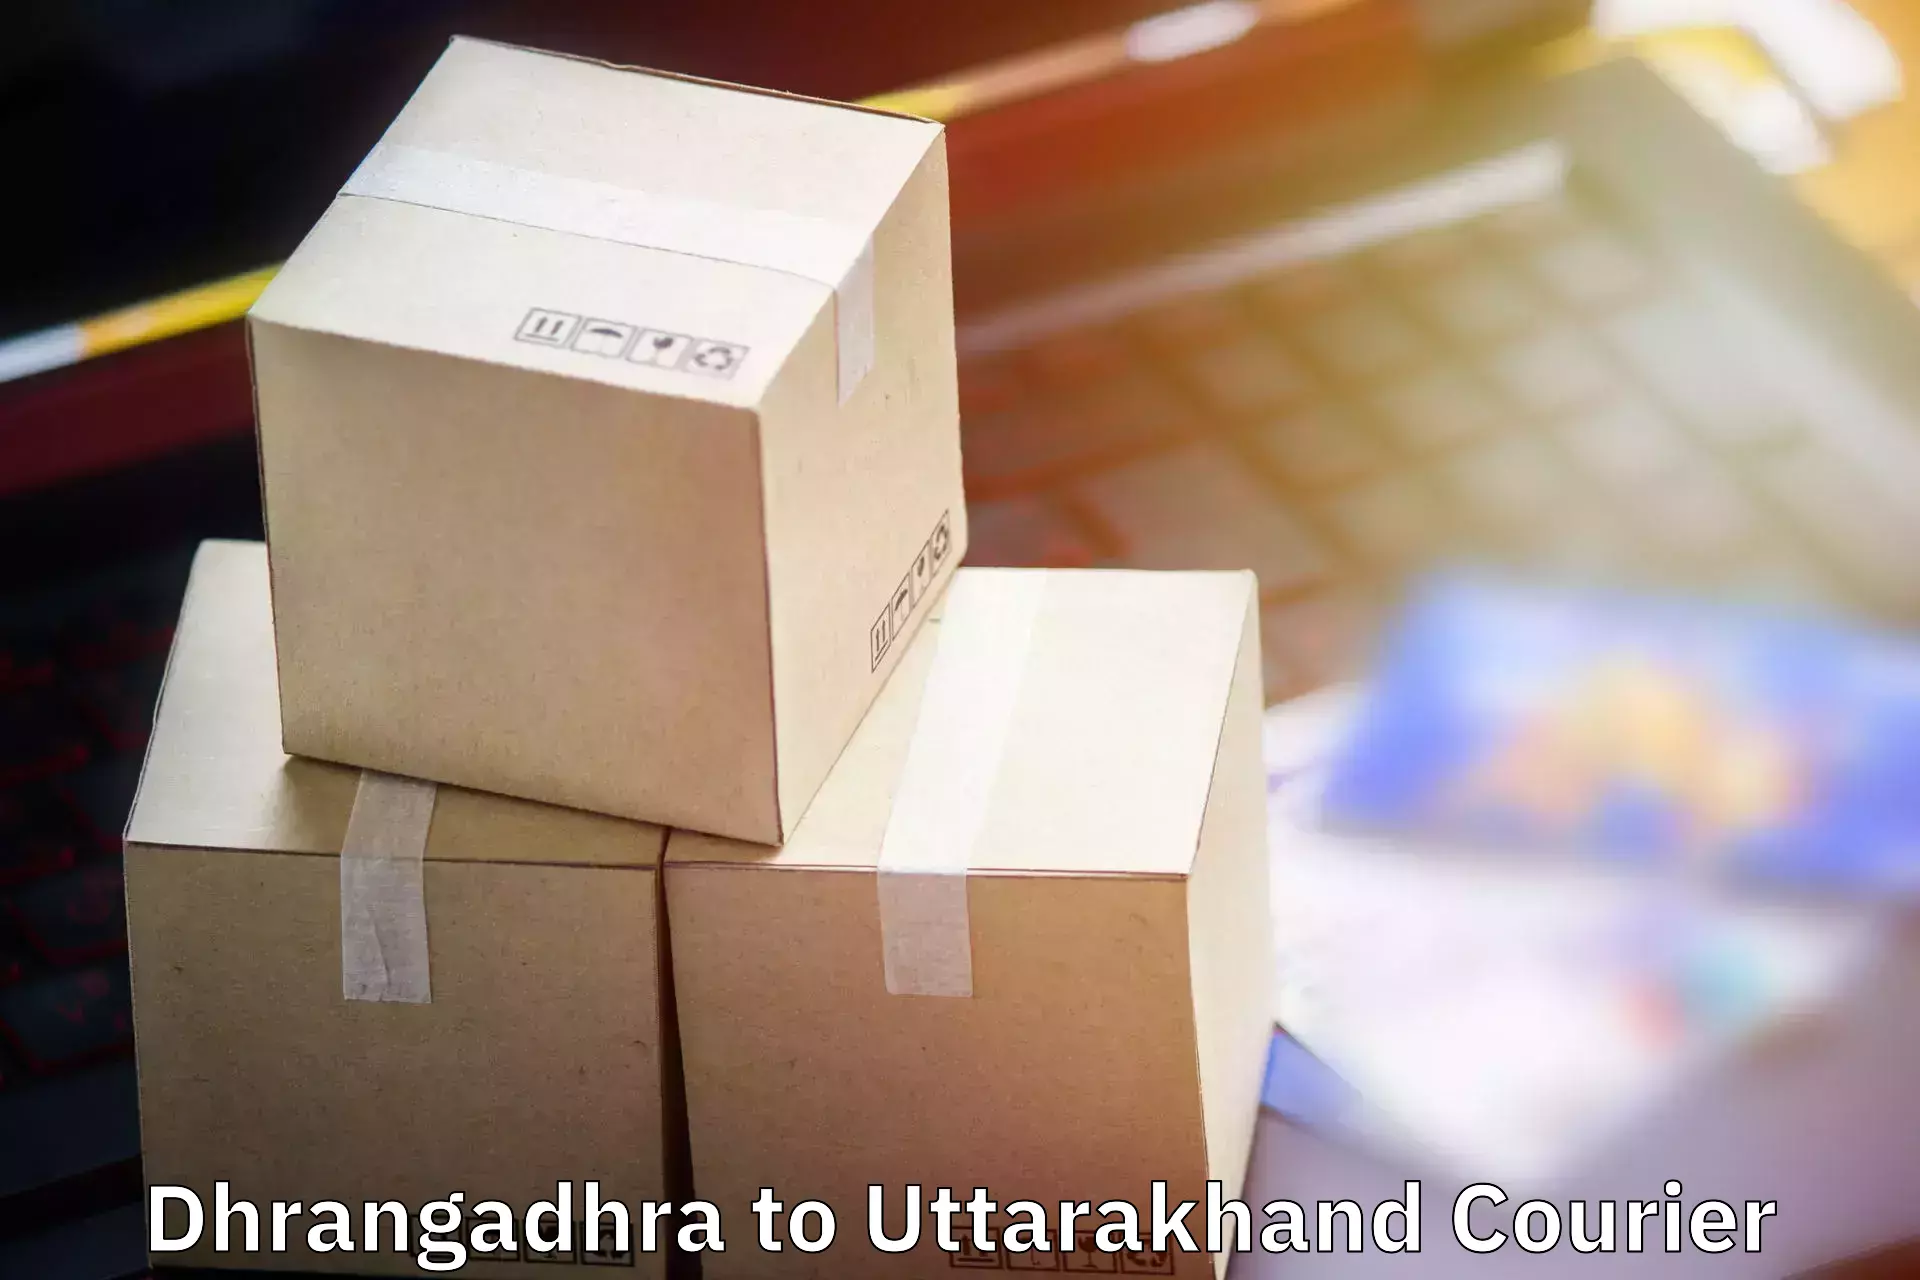 Baggage delivery technology Dhrangadhra to Bhagwanpur